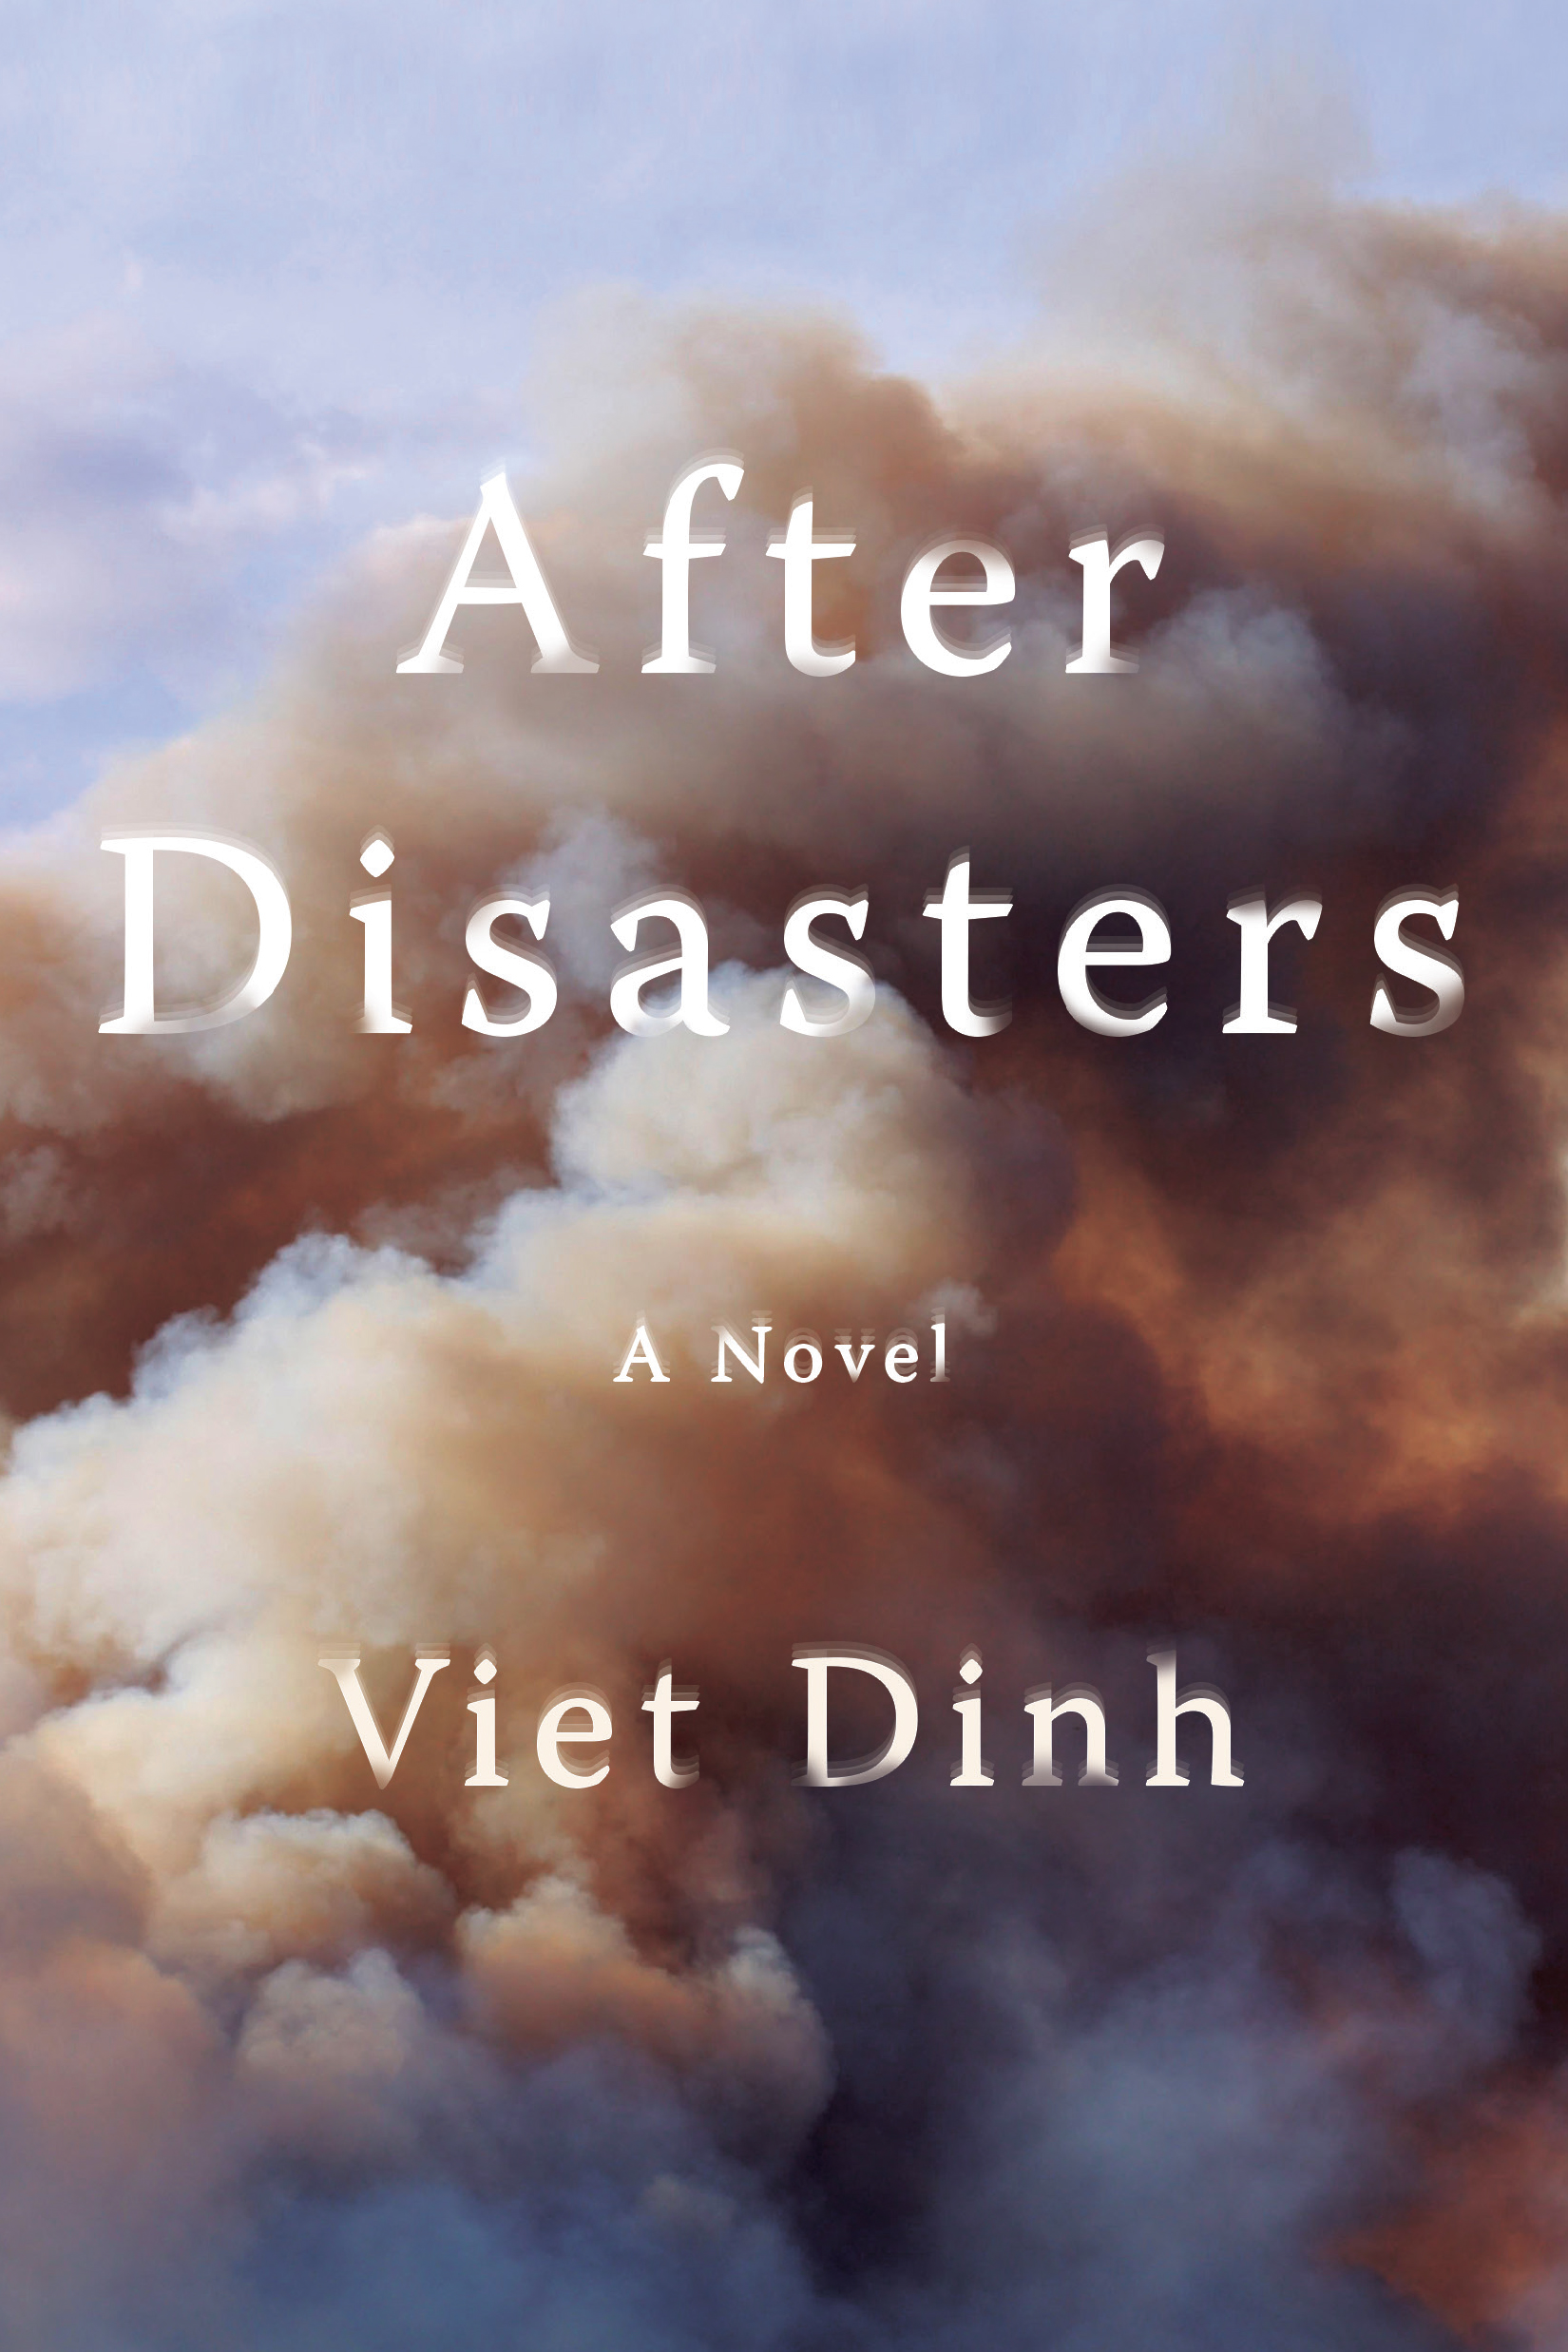  Beautifully and hauntingly written,&nbsp; After Disasters &nbsp;is told through the eyes of four people in the wake of a life-shattering earthquake in India. An intricate story of love and loss weaves together the emotional and intimate narratives o